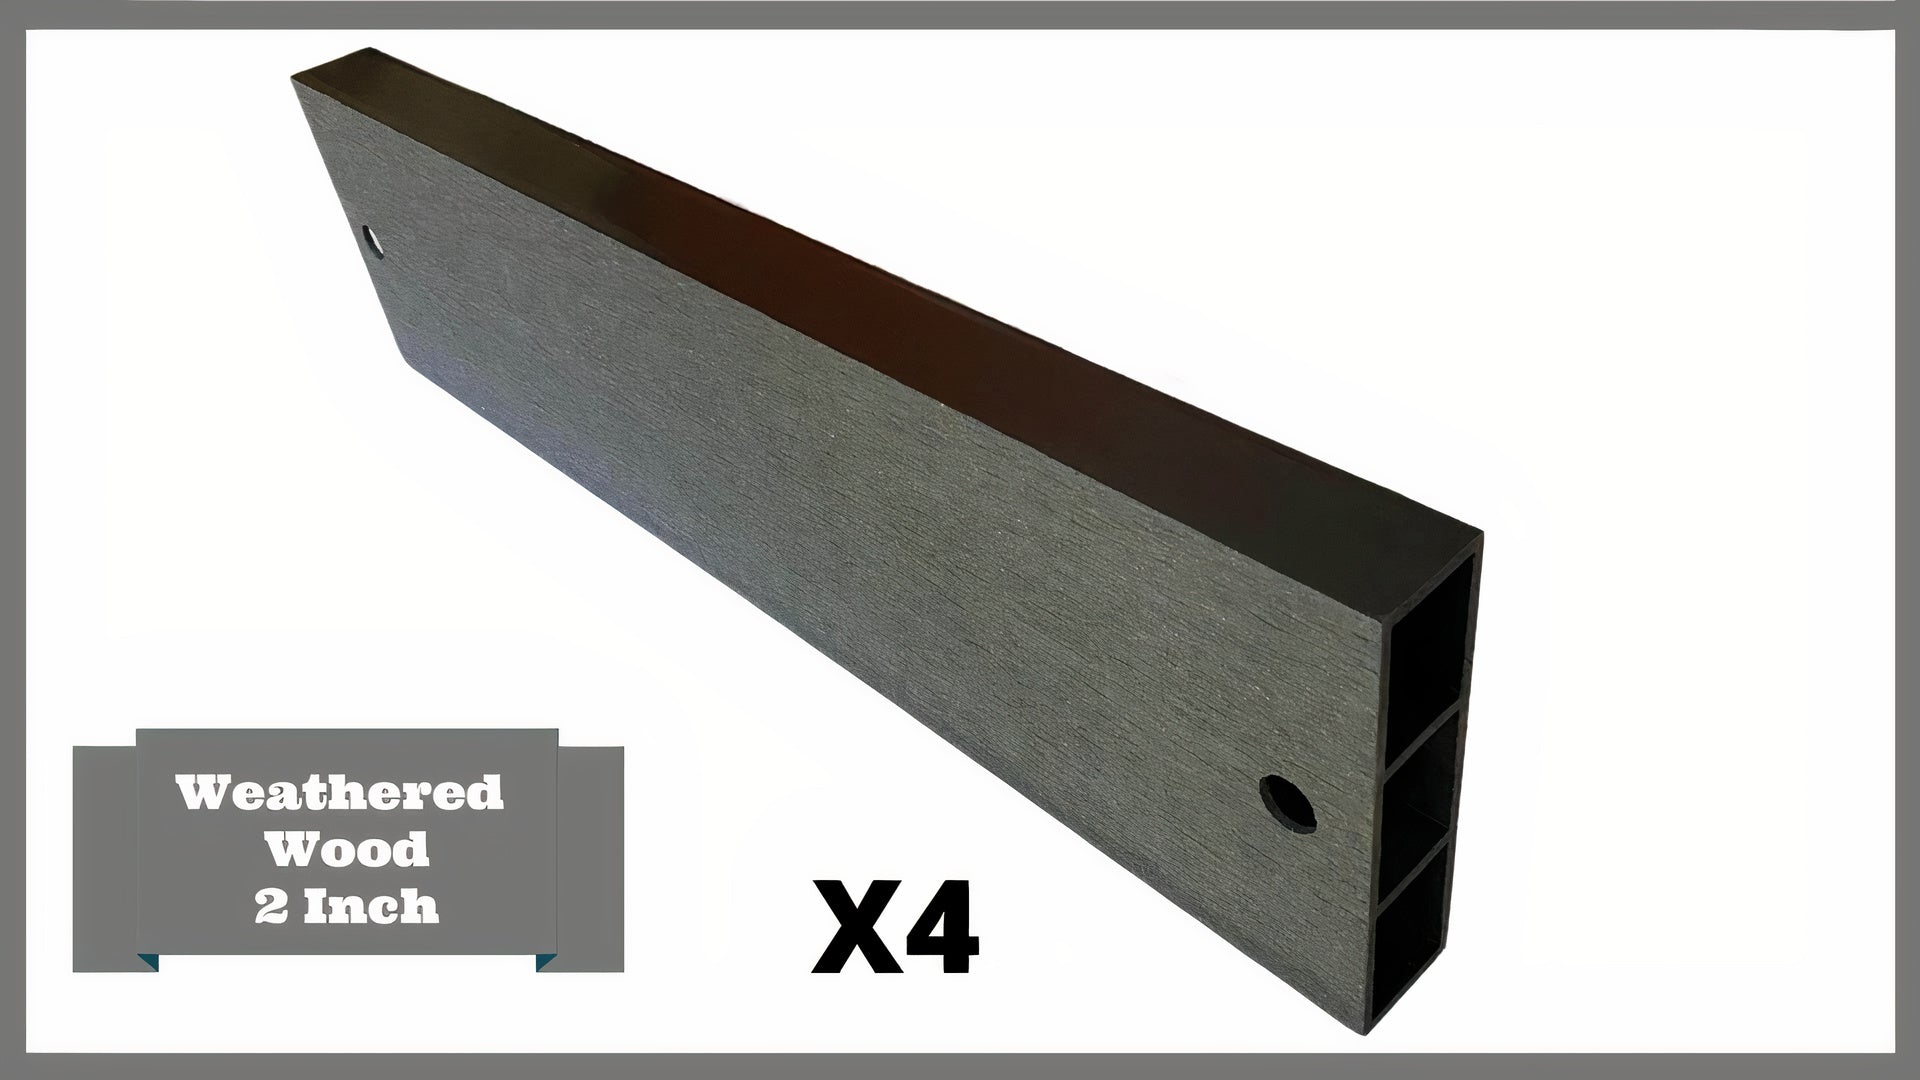 Weathered Wood 2' Snap-Lock Ready 2" Profile Composite Straight Boards w/ Bracket Packs (4 Board Pack) Parts Frame It All 